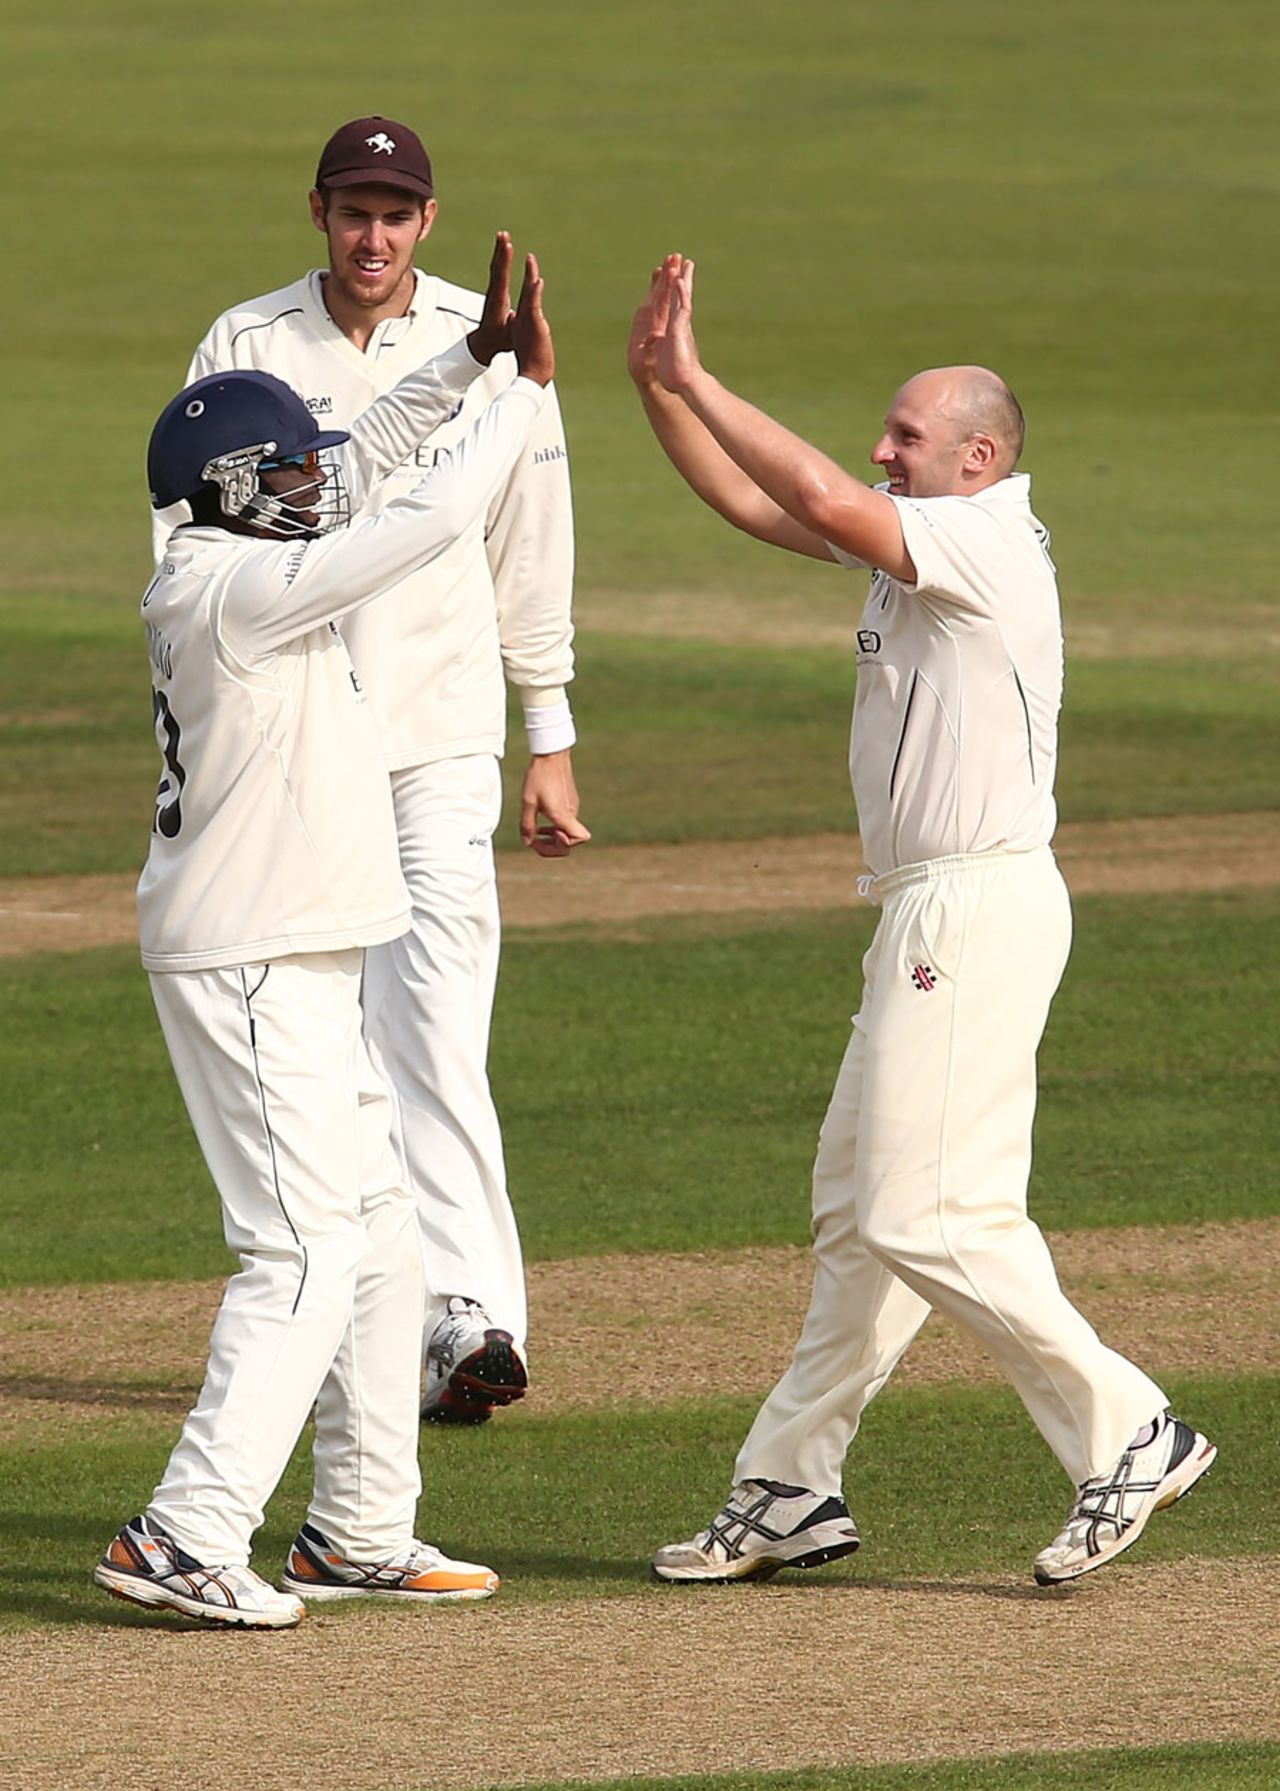 James Tredwell's wickets left Hampshire in trouble, Hampshire v Kent, County Championship, Division Two, Ageas Bowl, 3rd day, September 17, 2014